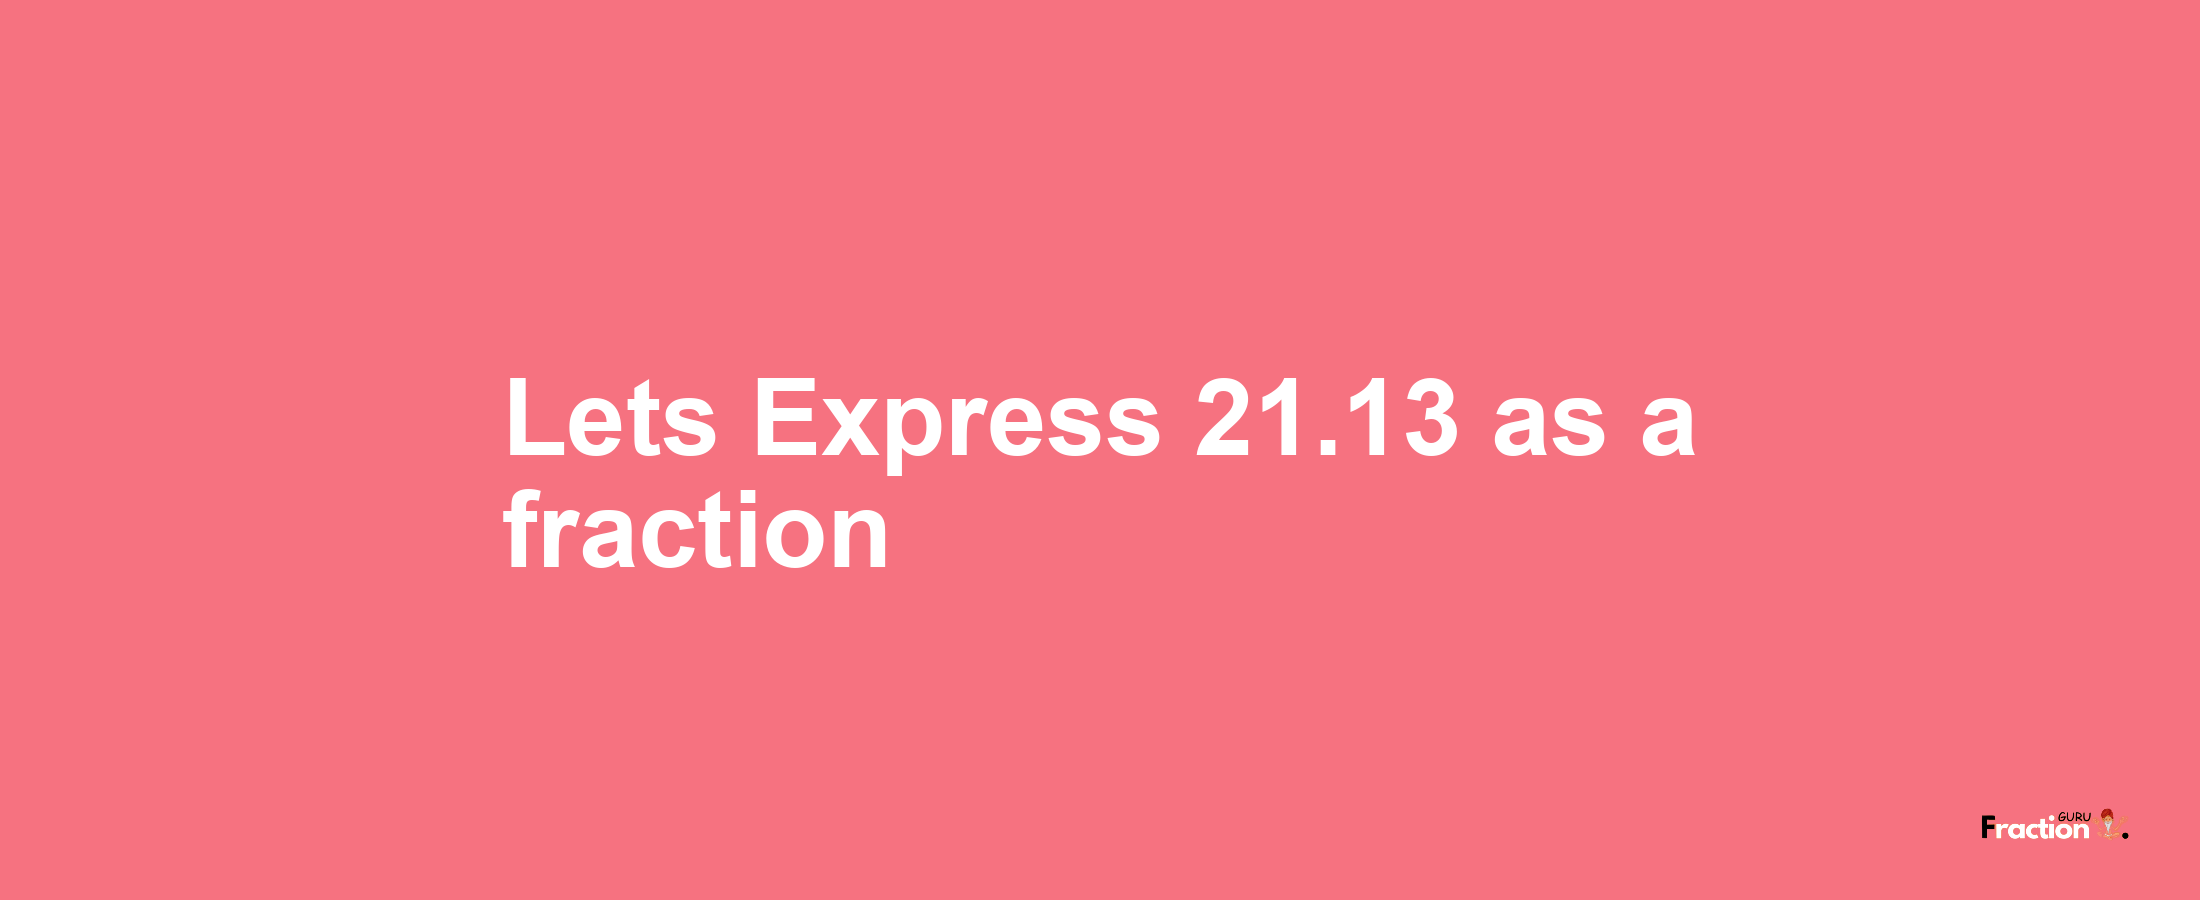 Lets Express 21.13 as afraction